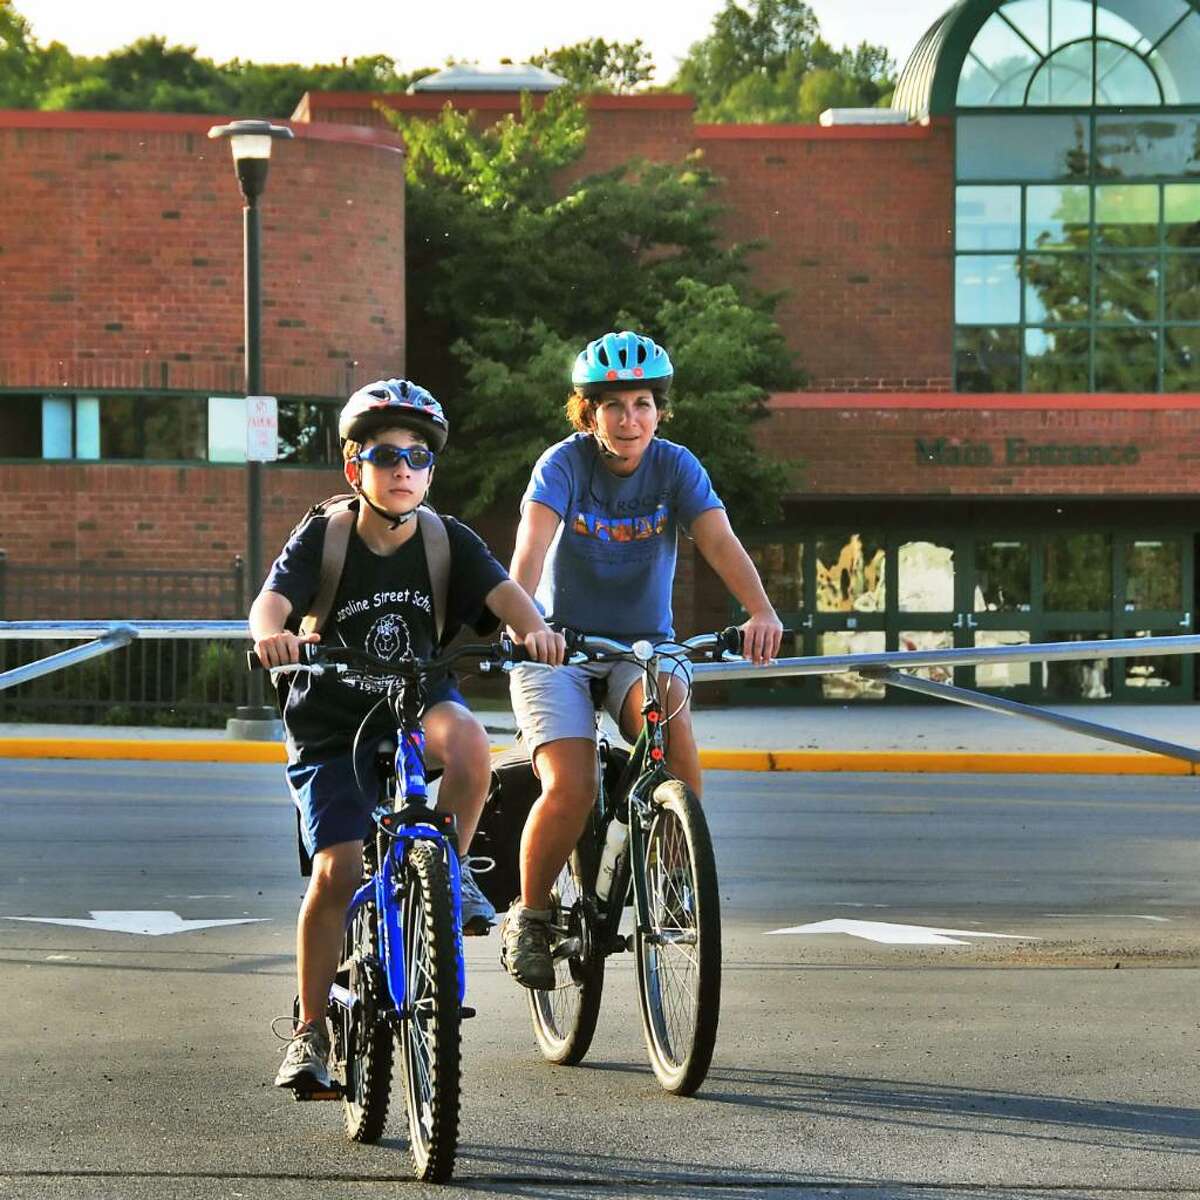 Student Adam Marino, left, 12, rides his bike home from school Thursday afternoon Sept. 24, 2009, accompanied by his mother, Janette Kaddo Marino. (John Carl D'Annibale / Times Union)